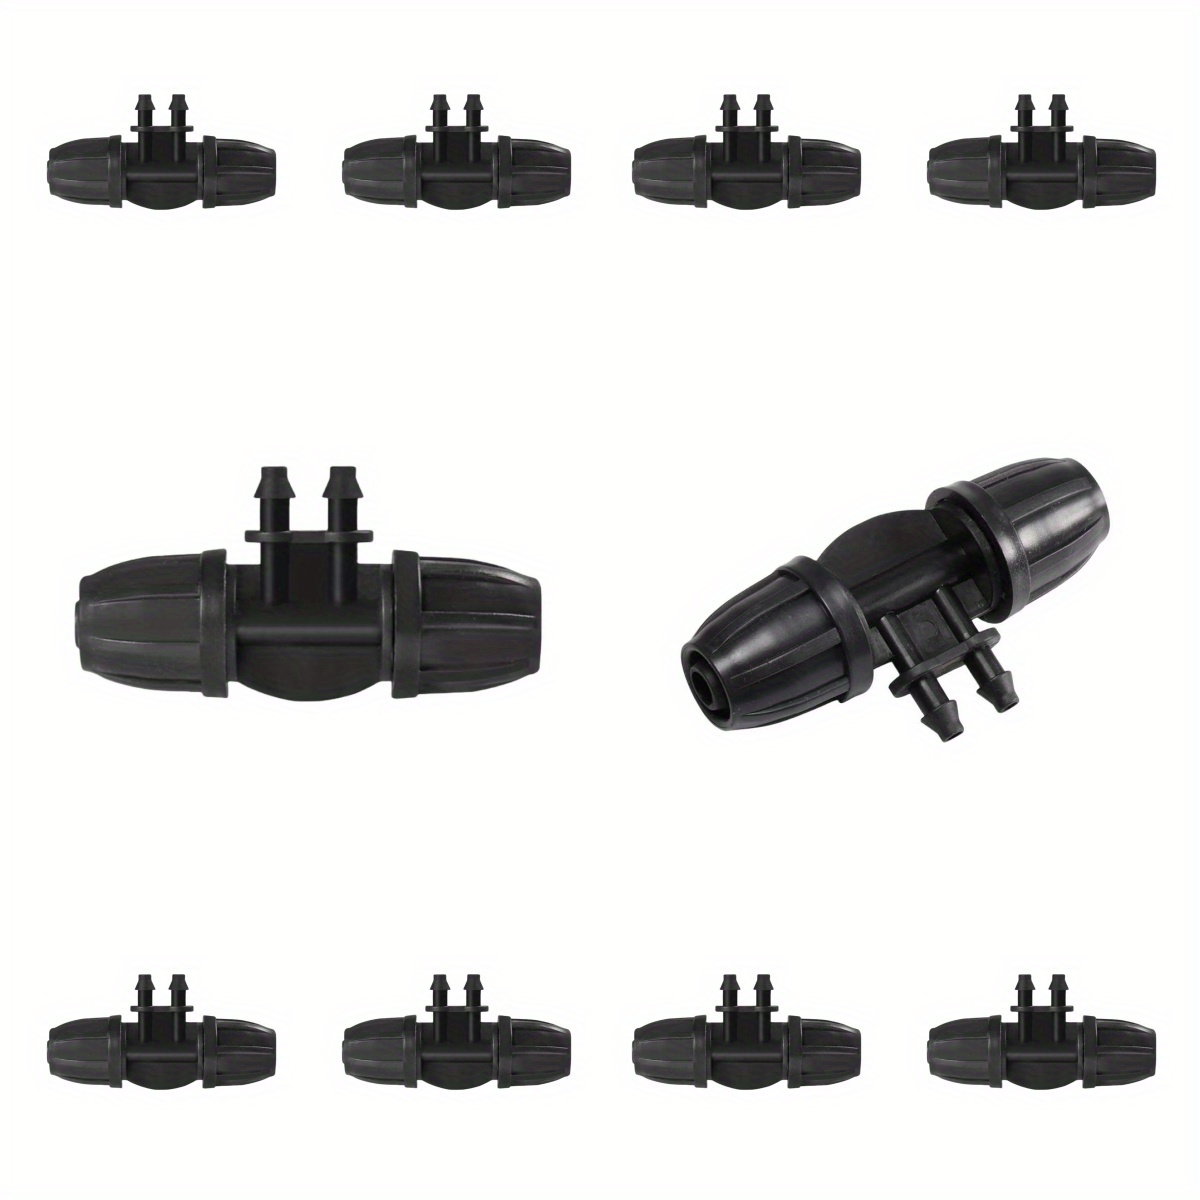 

10pcs, 5/16 Inch Irrigation Fittings Lock Reduced 4 Way Connectors For (5/16" Id X0.43-0.47" Od) To 1/4" Drip Tubing Barbed Barbed Reducer Tee